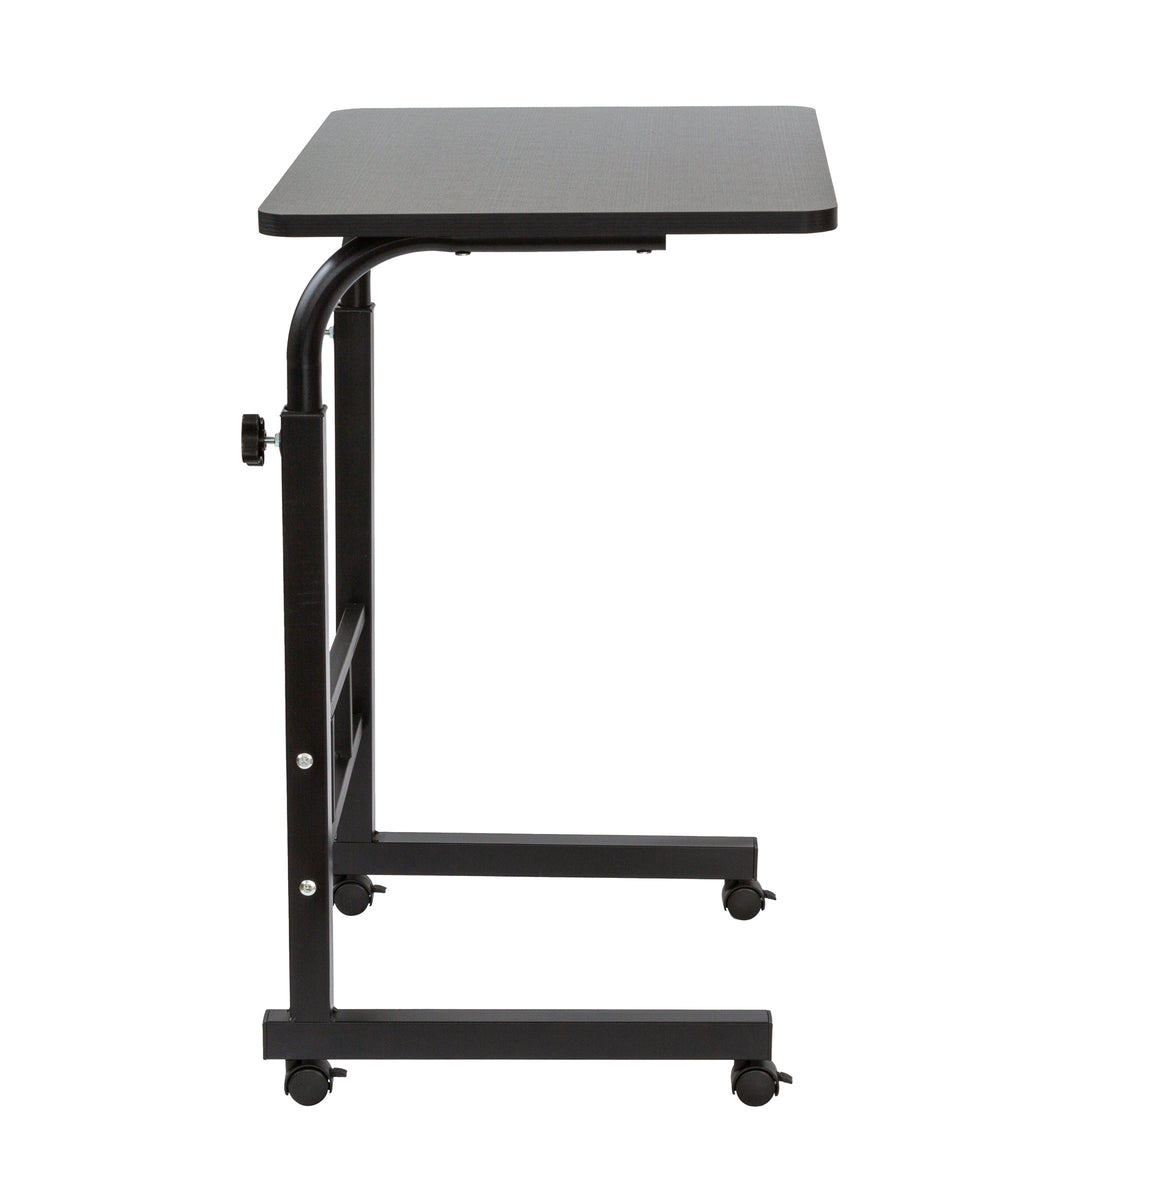 Side view of the Black Portable Laptop Desk with Adjustable Height